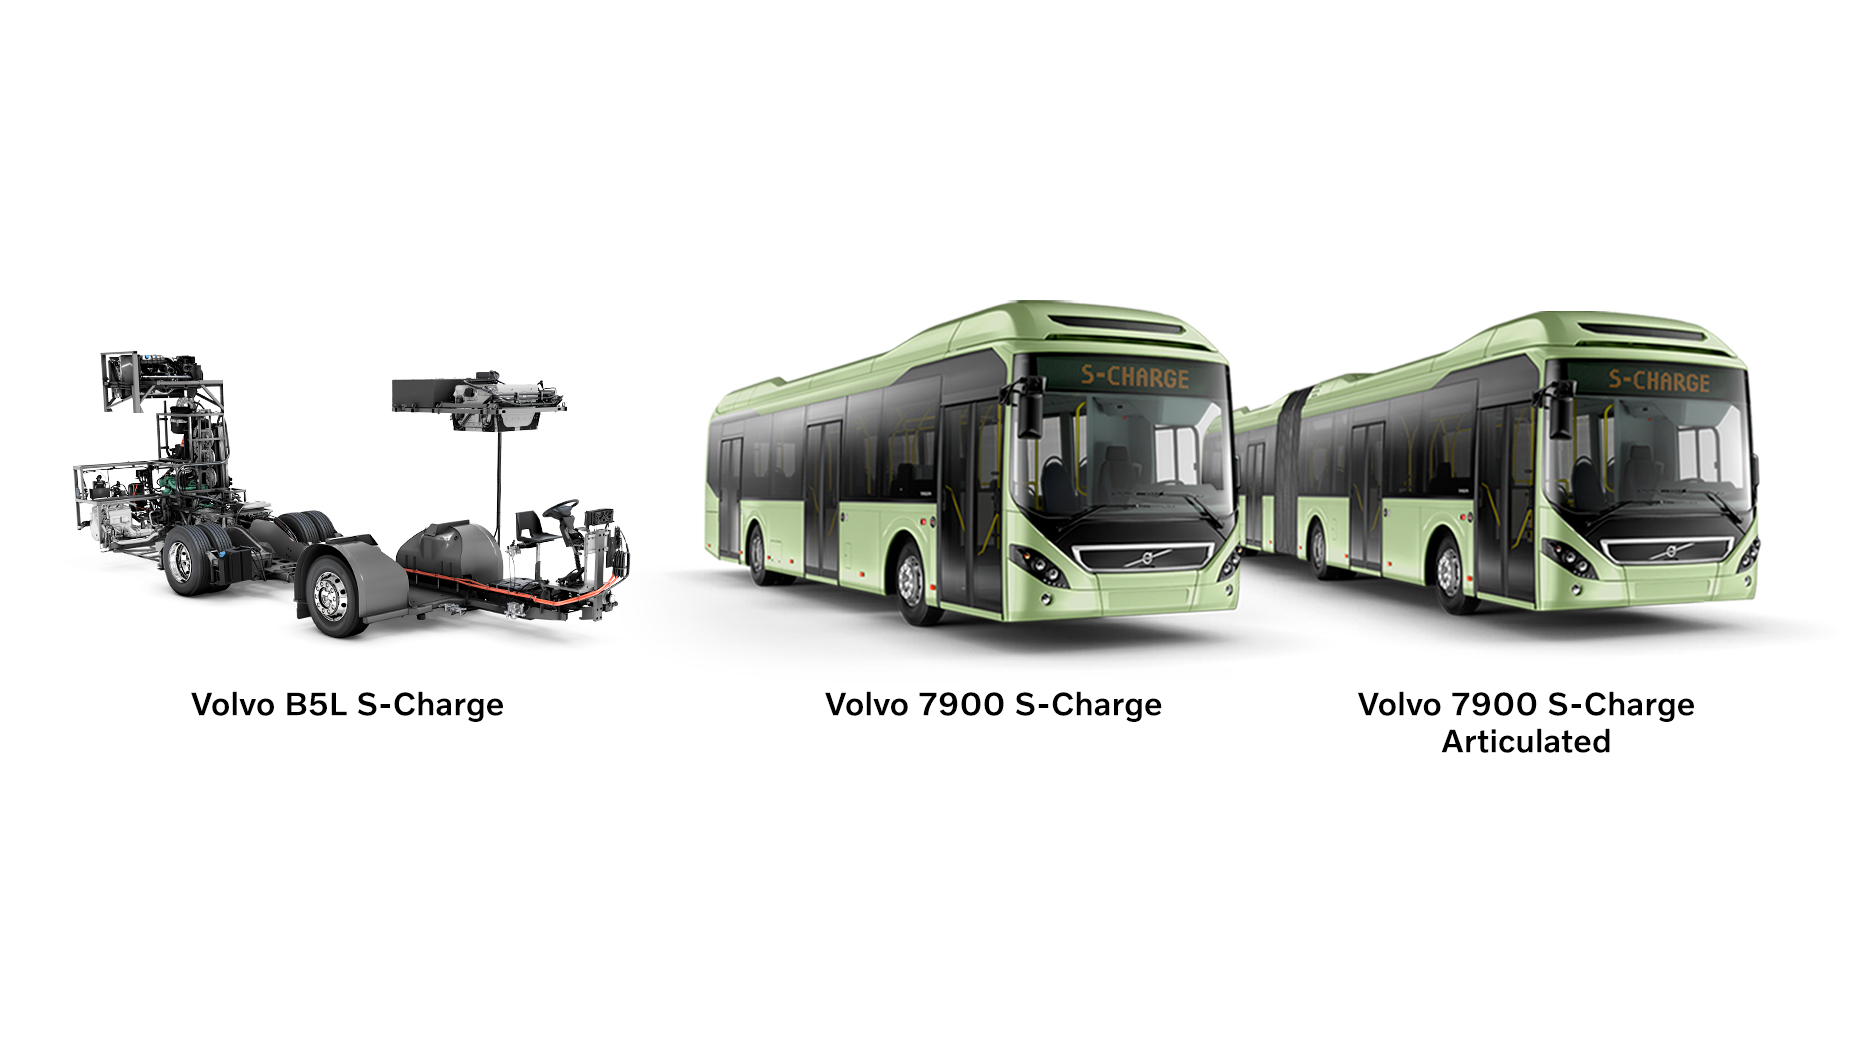 Volvo’s self-charging buses upgraded